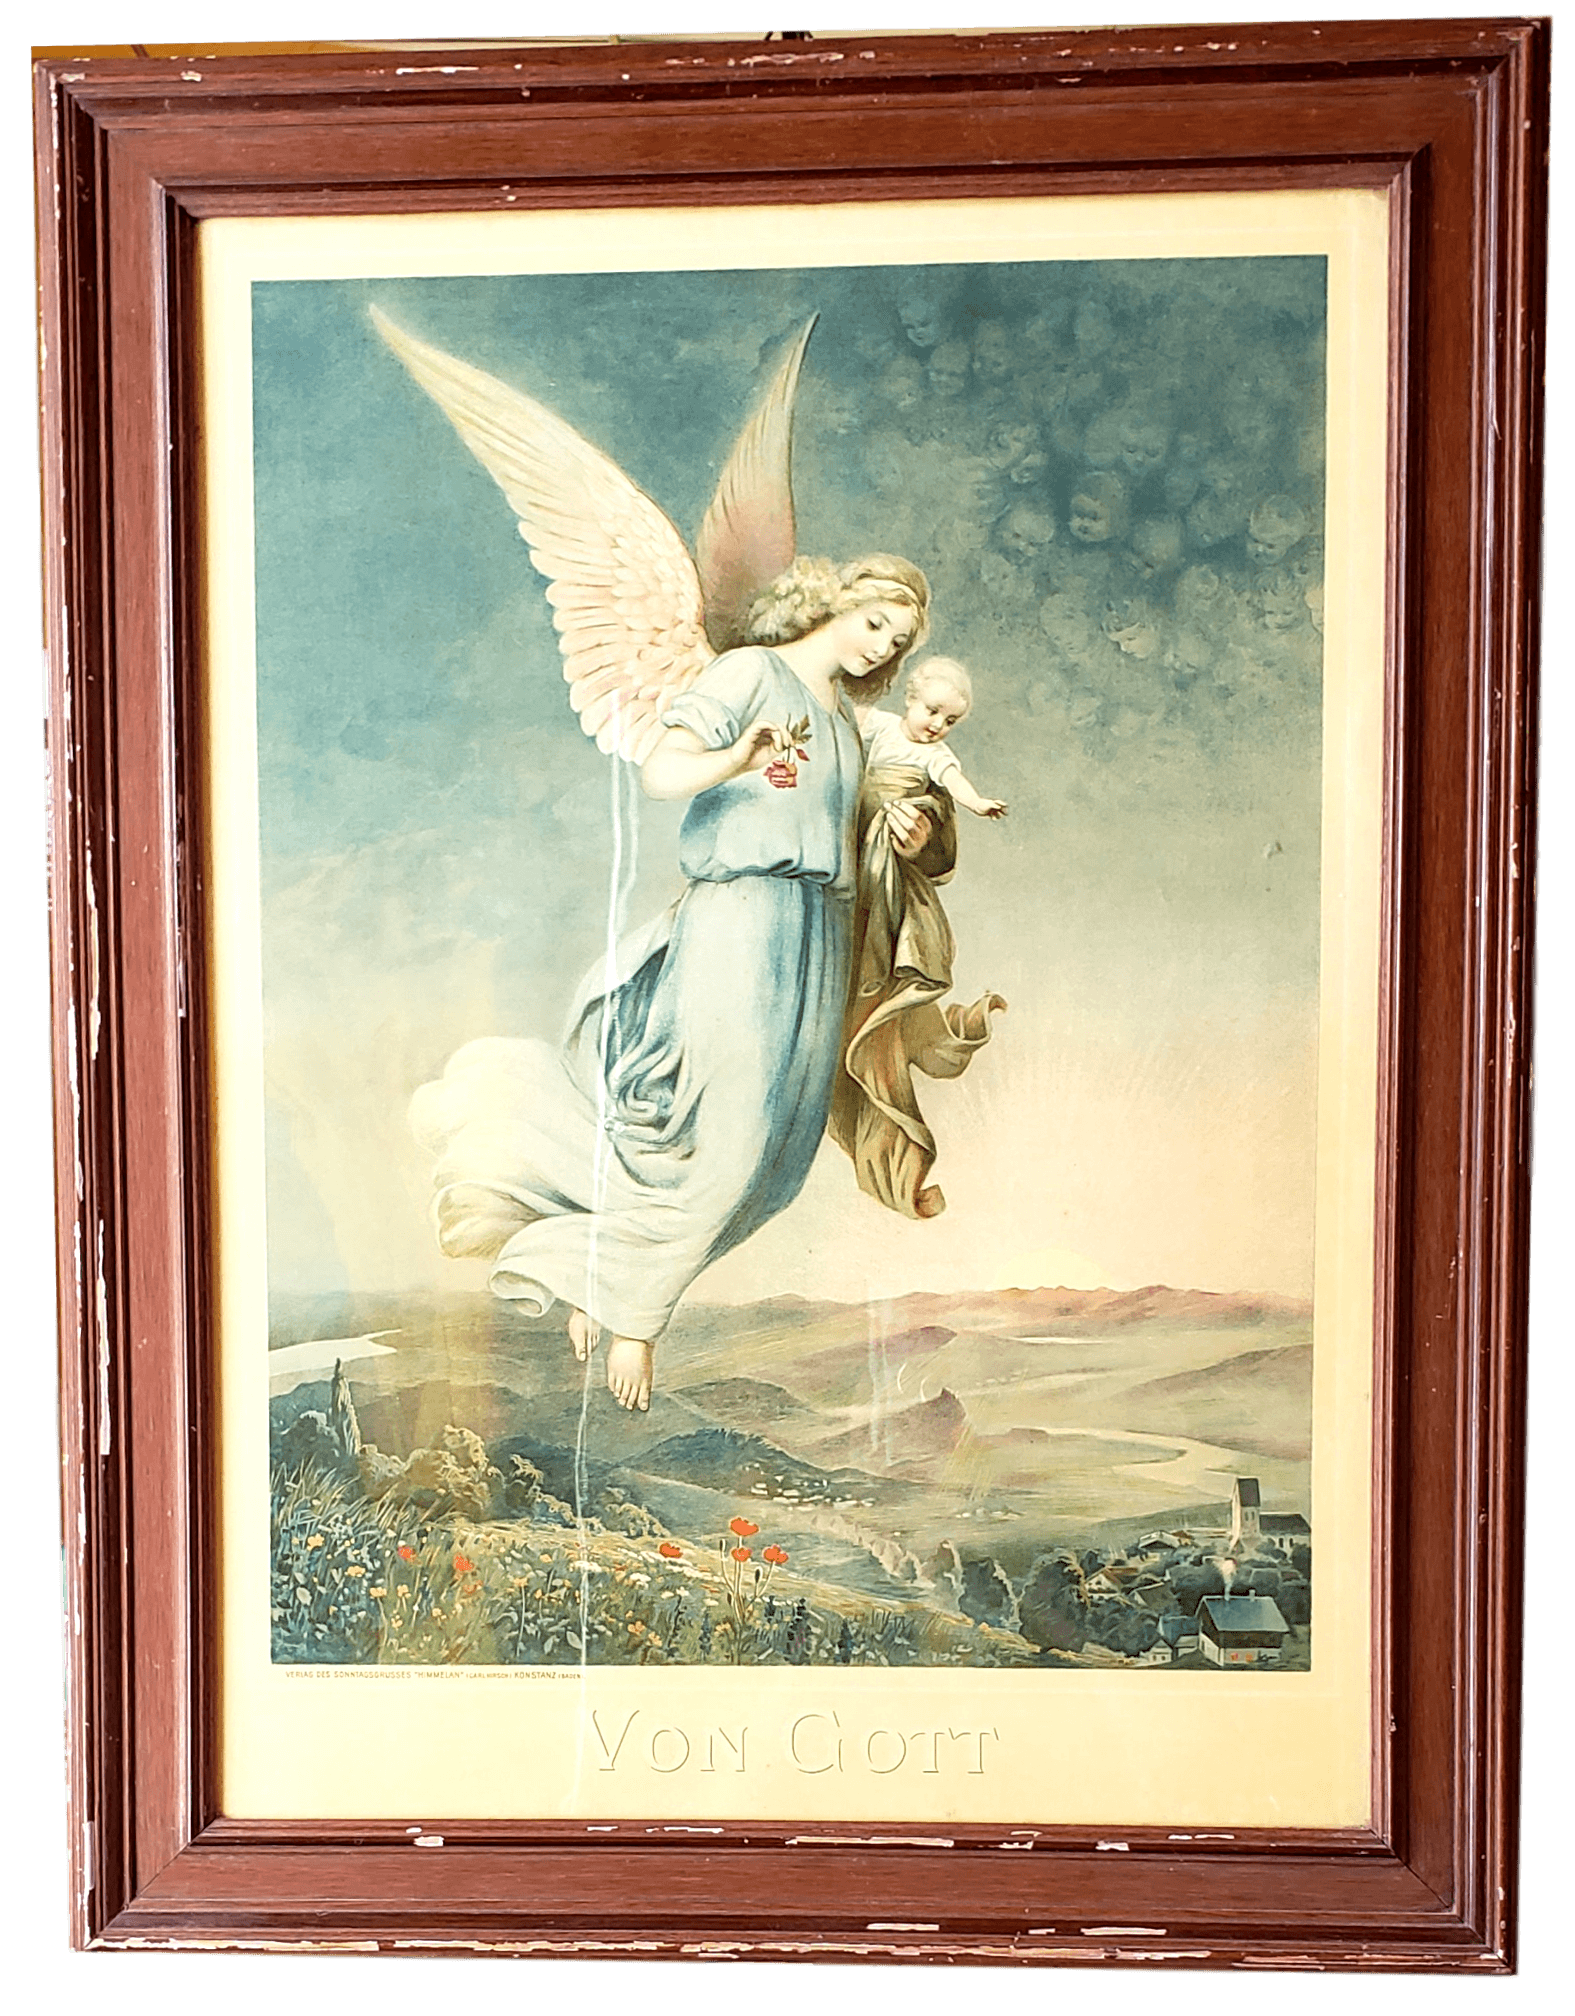 Framed Wall Art "Von Gott" From God Angel Delivering Babies From Heaven Carl Hirsch Professionally Framed 28" x 22" - Ysleta Mission Gift Shop- VOTED El Paso's Best Gift Shop